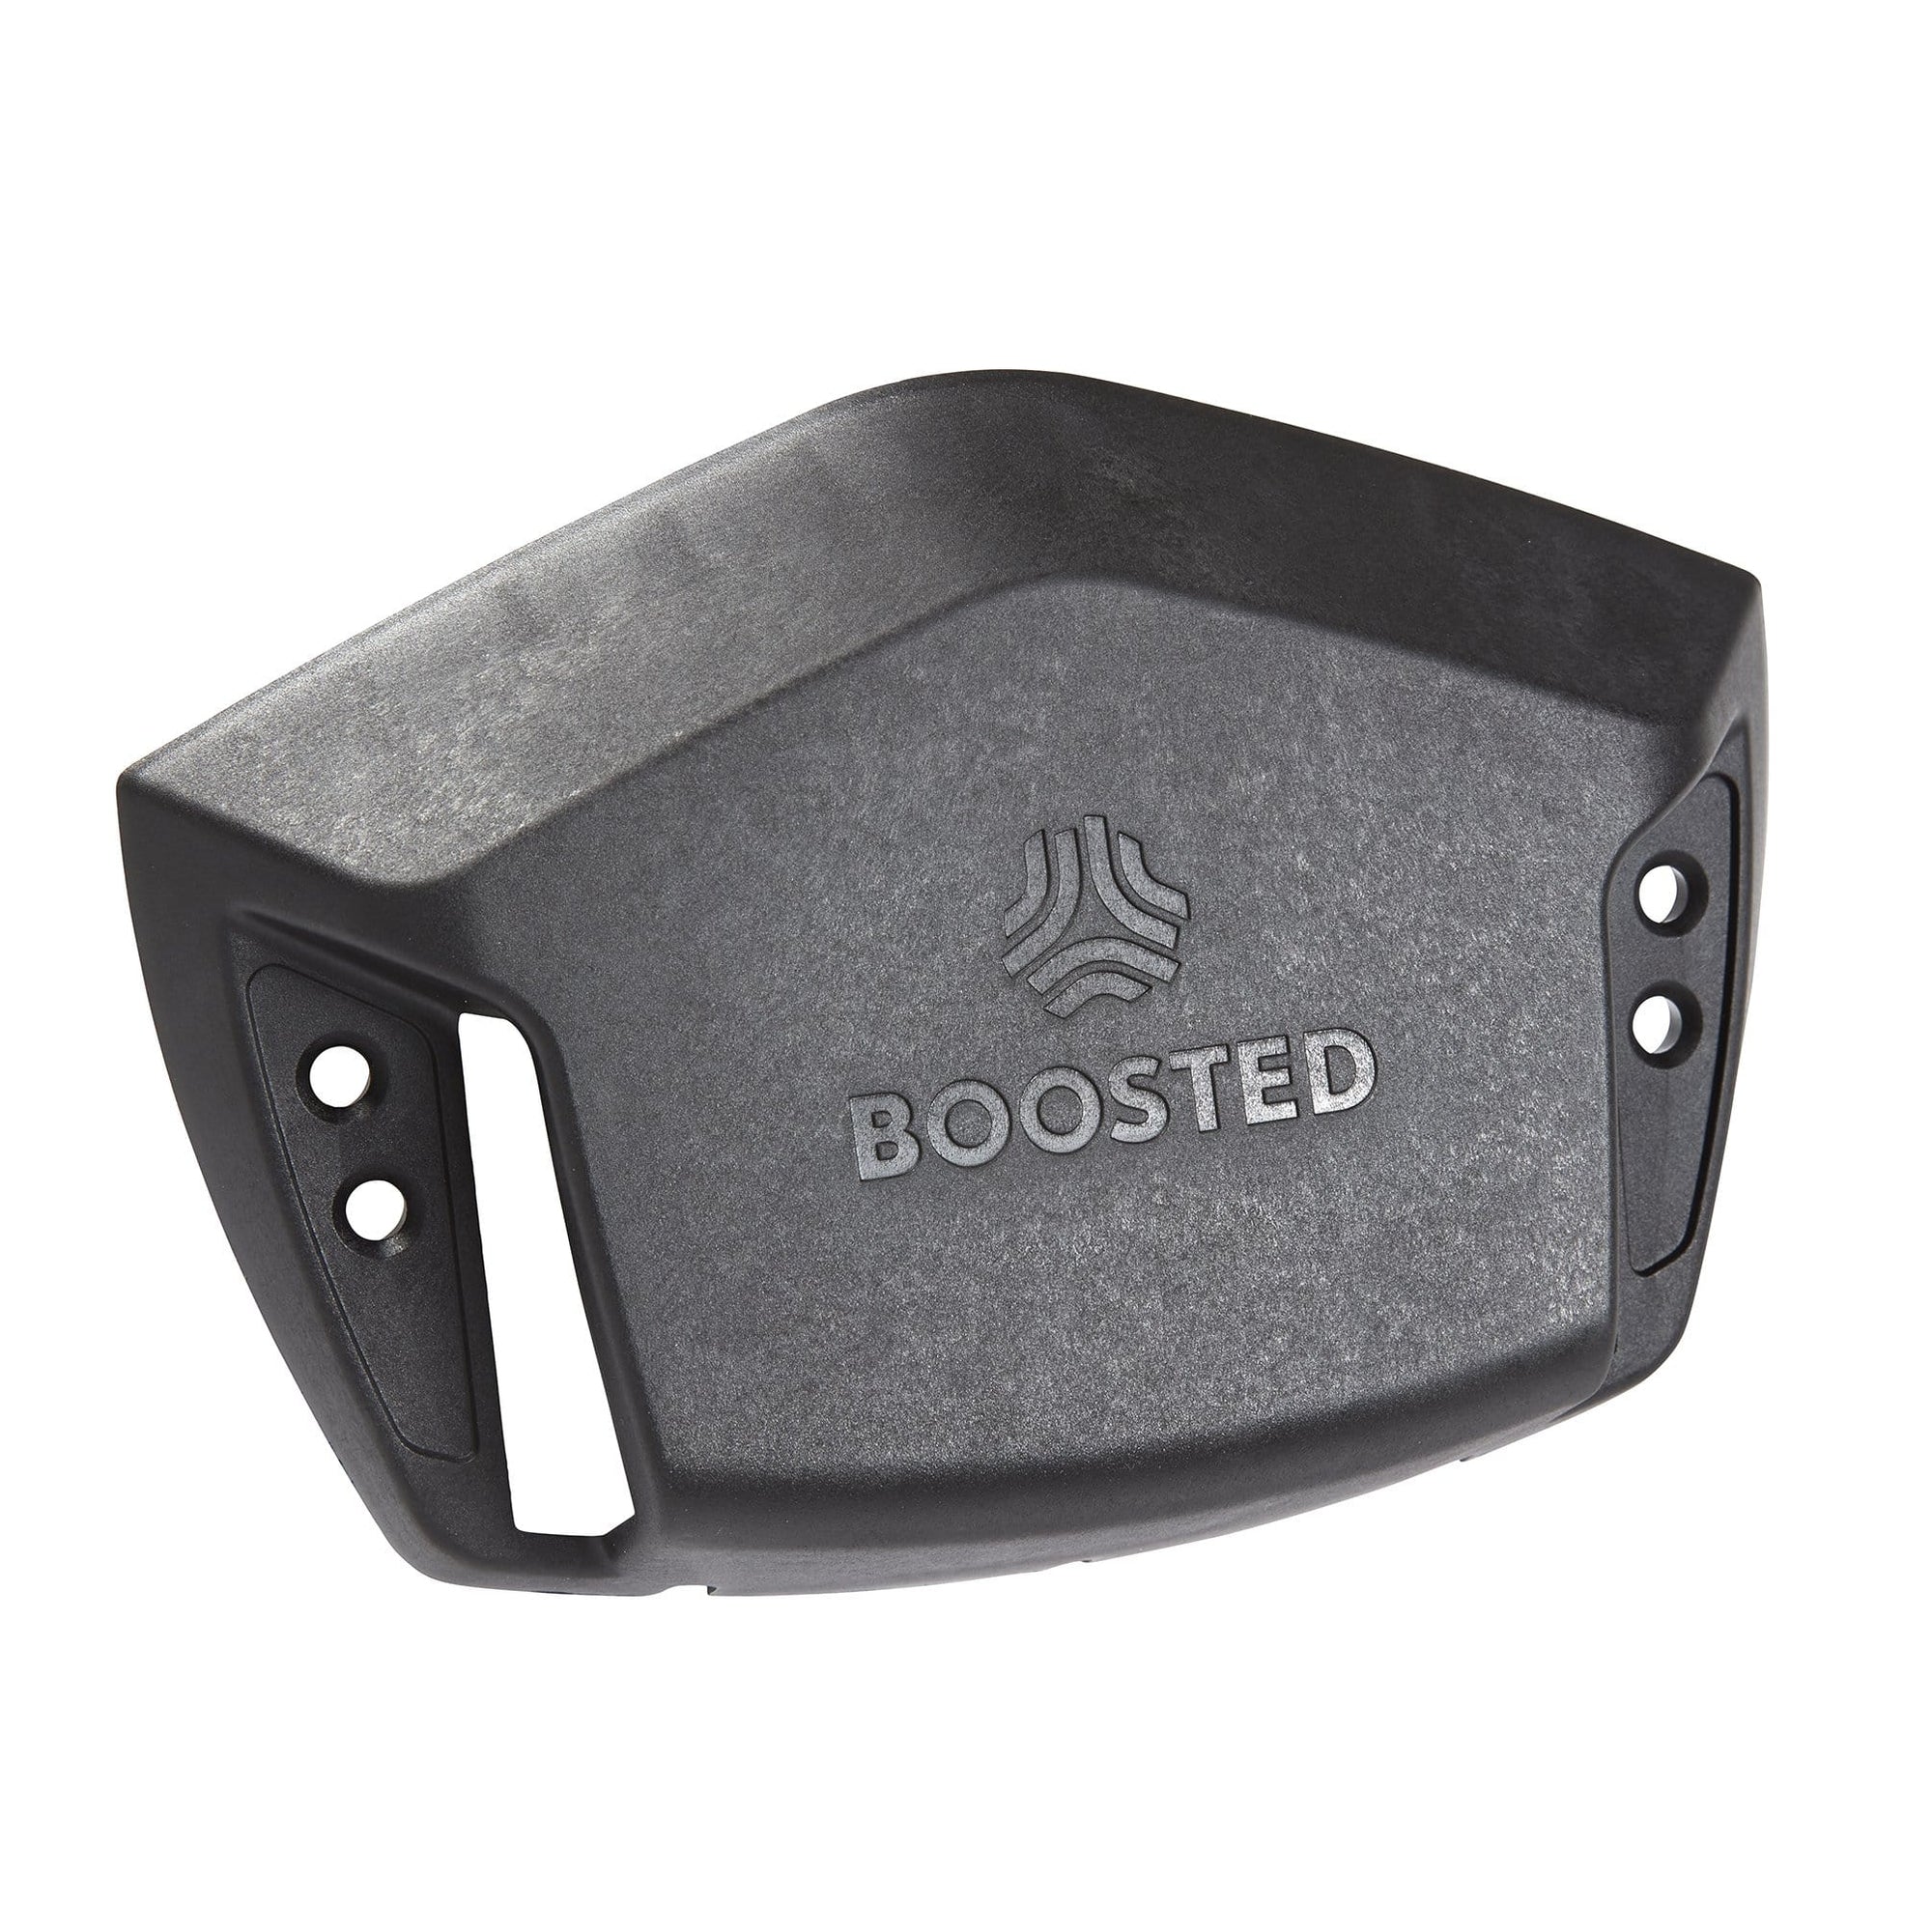 Boosted - Motor Driver Cover